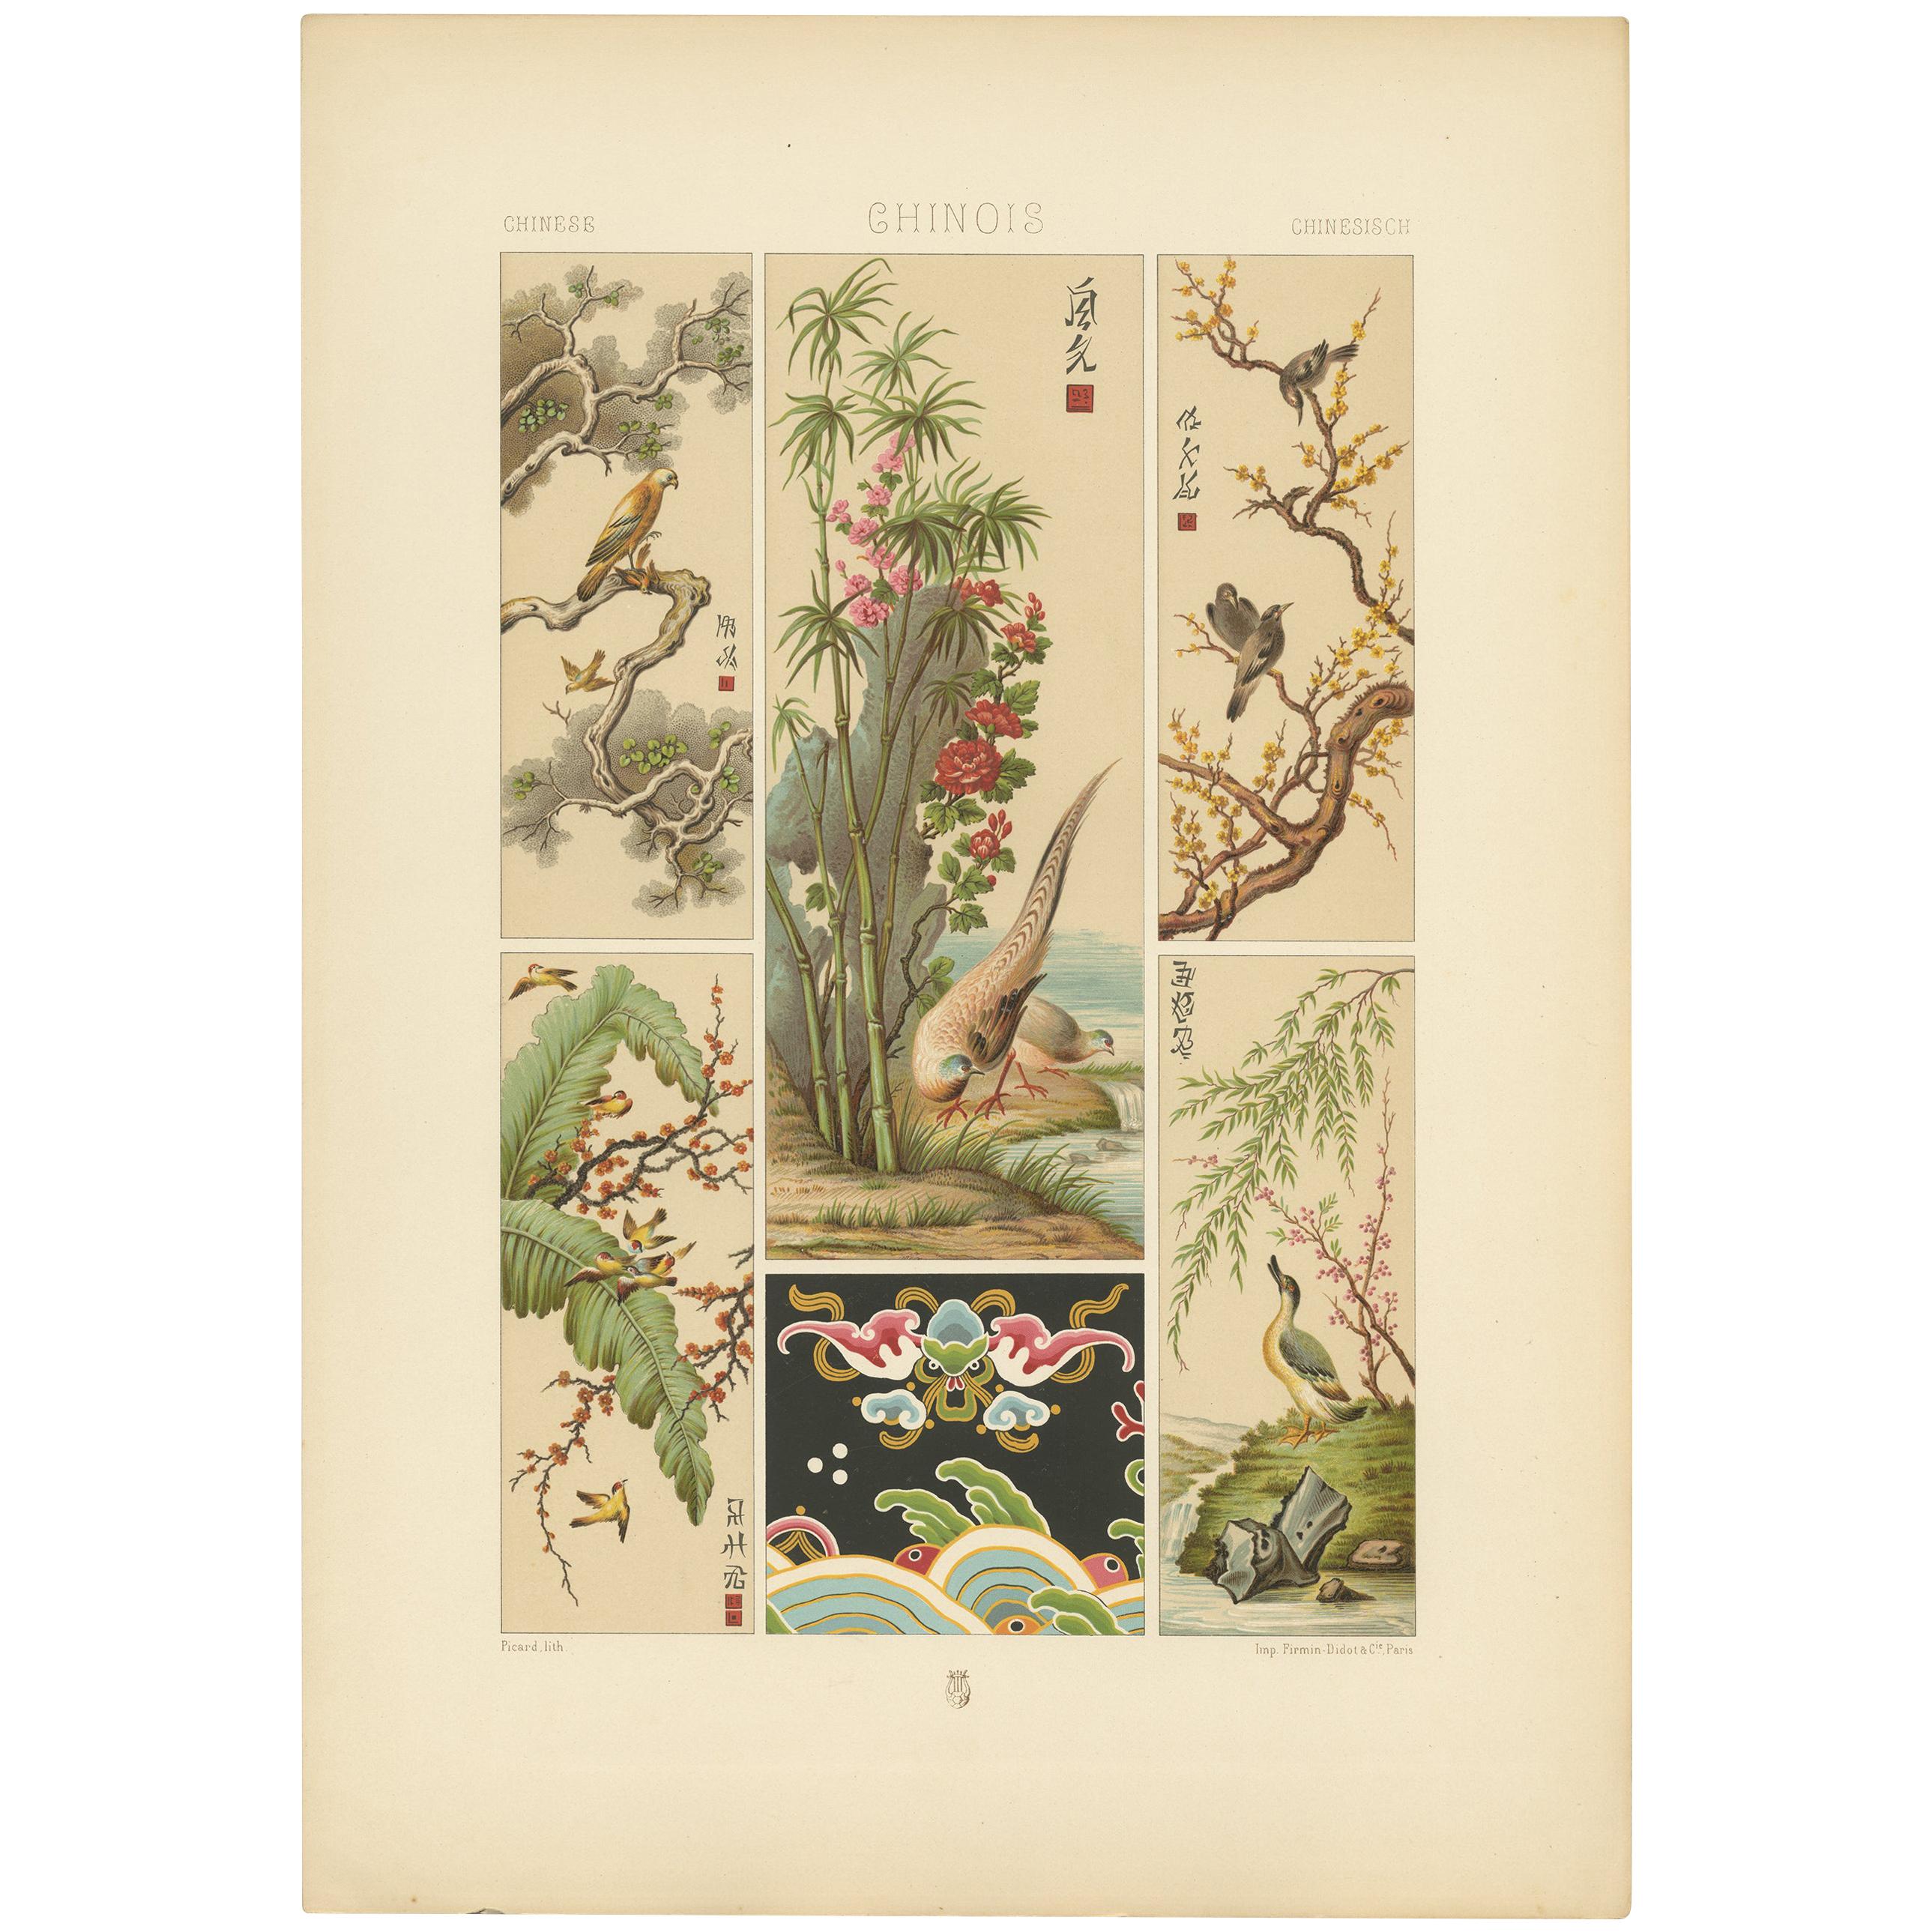 Antique Print of Chinese Embroidery Paintings by Racinet 'circa 1890' For Sale